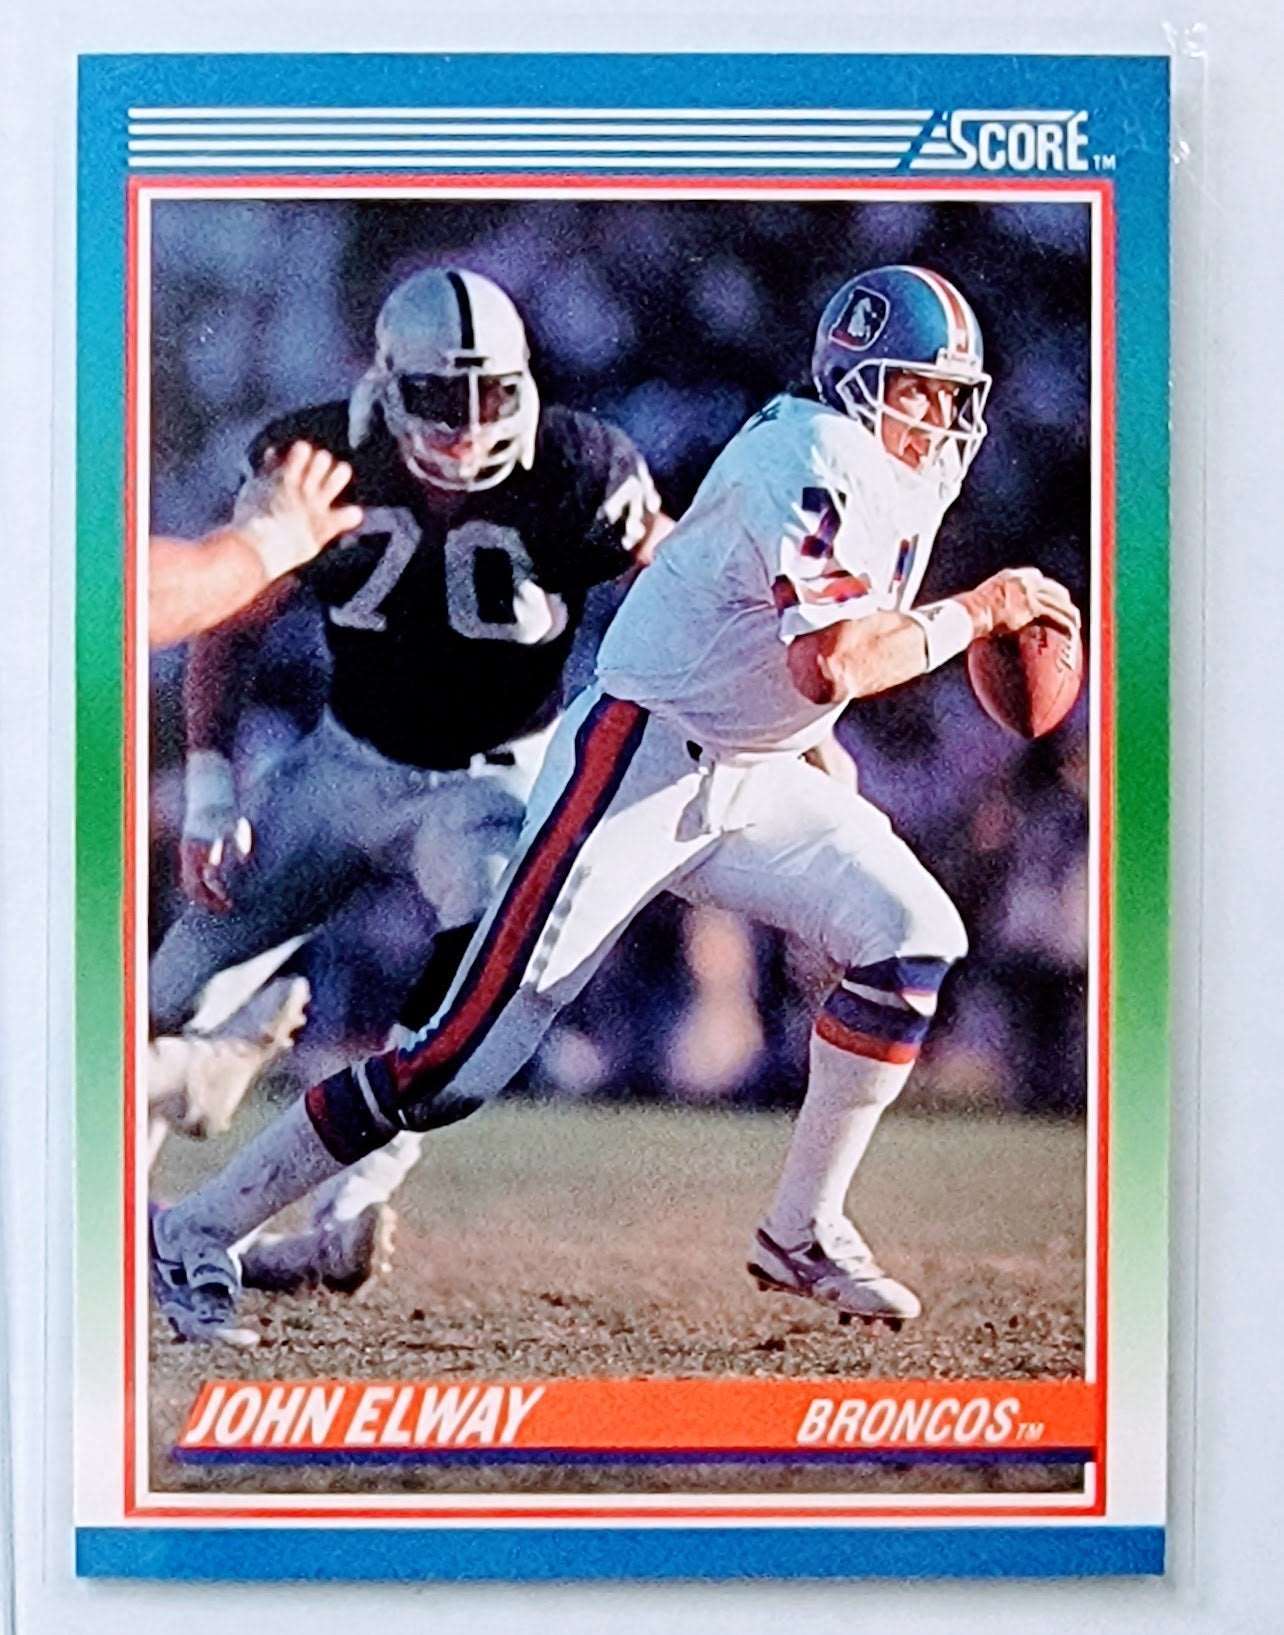 1990 Score John Elway Football Card AVM1 simple Xclusive Collectibles   